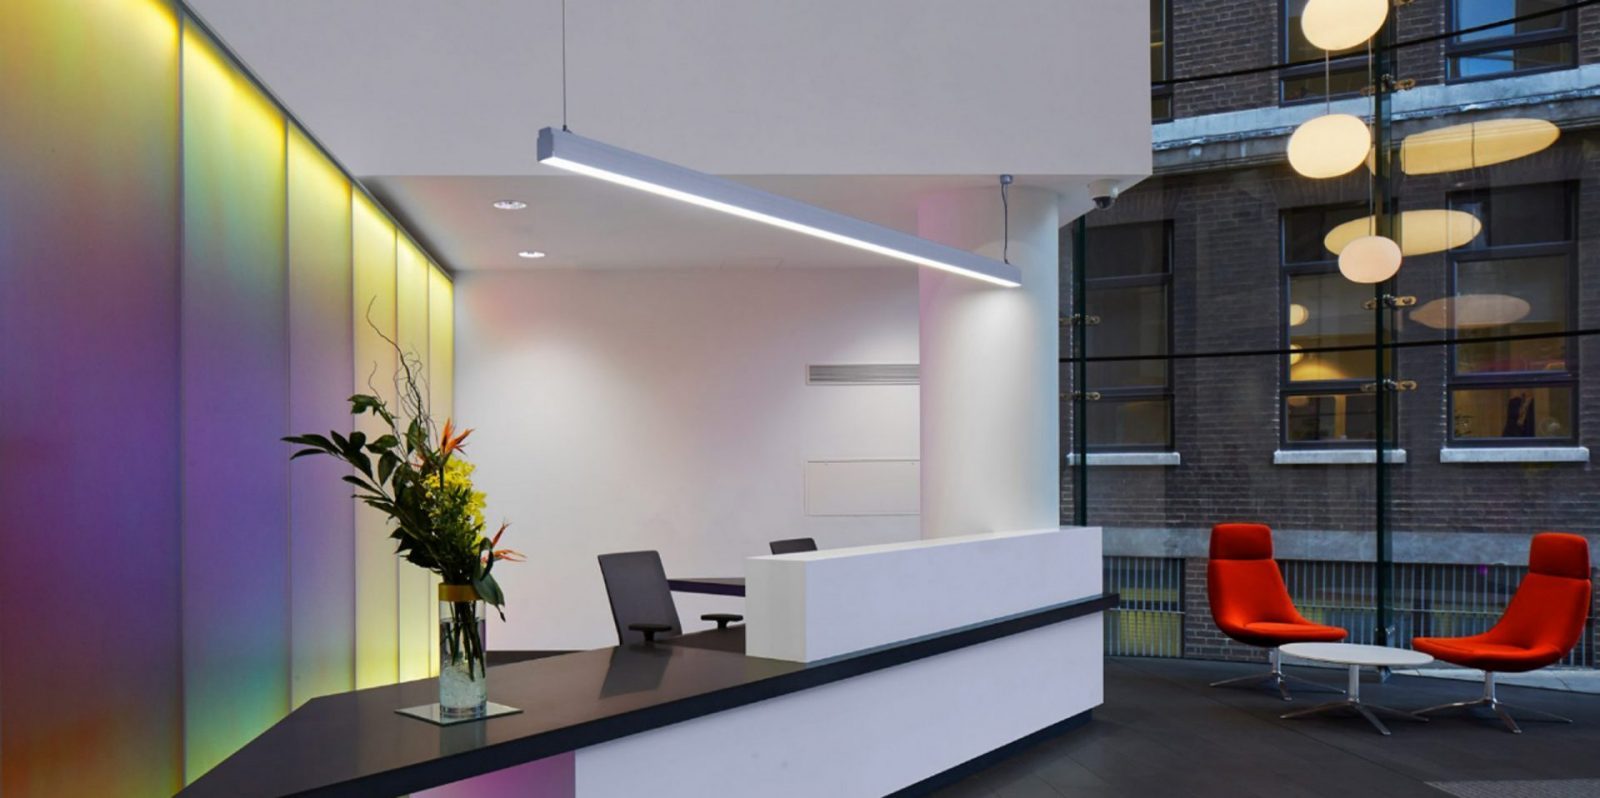 st phillips point birmingham offices refurb interiors architects jersey architecture8